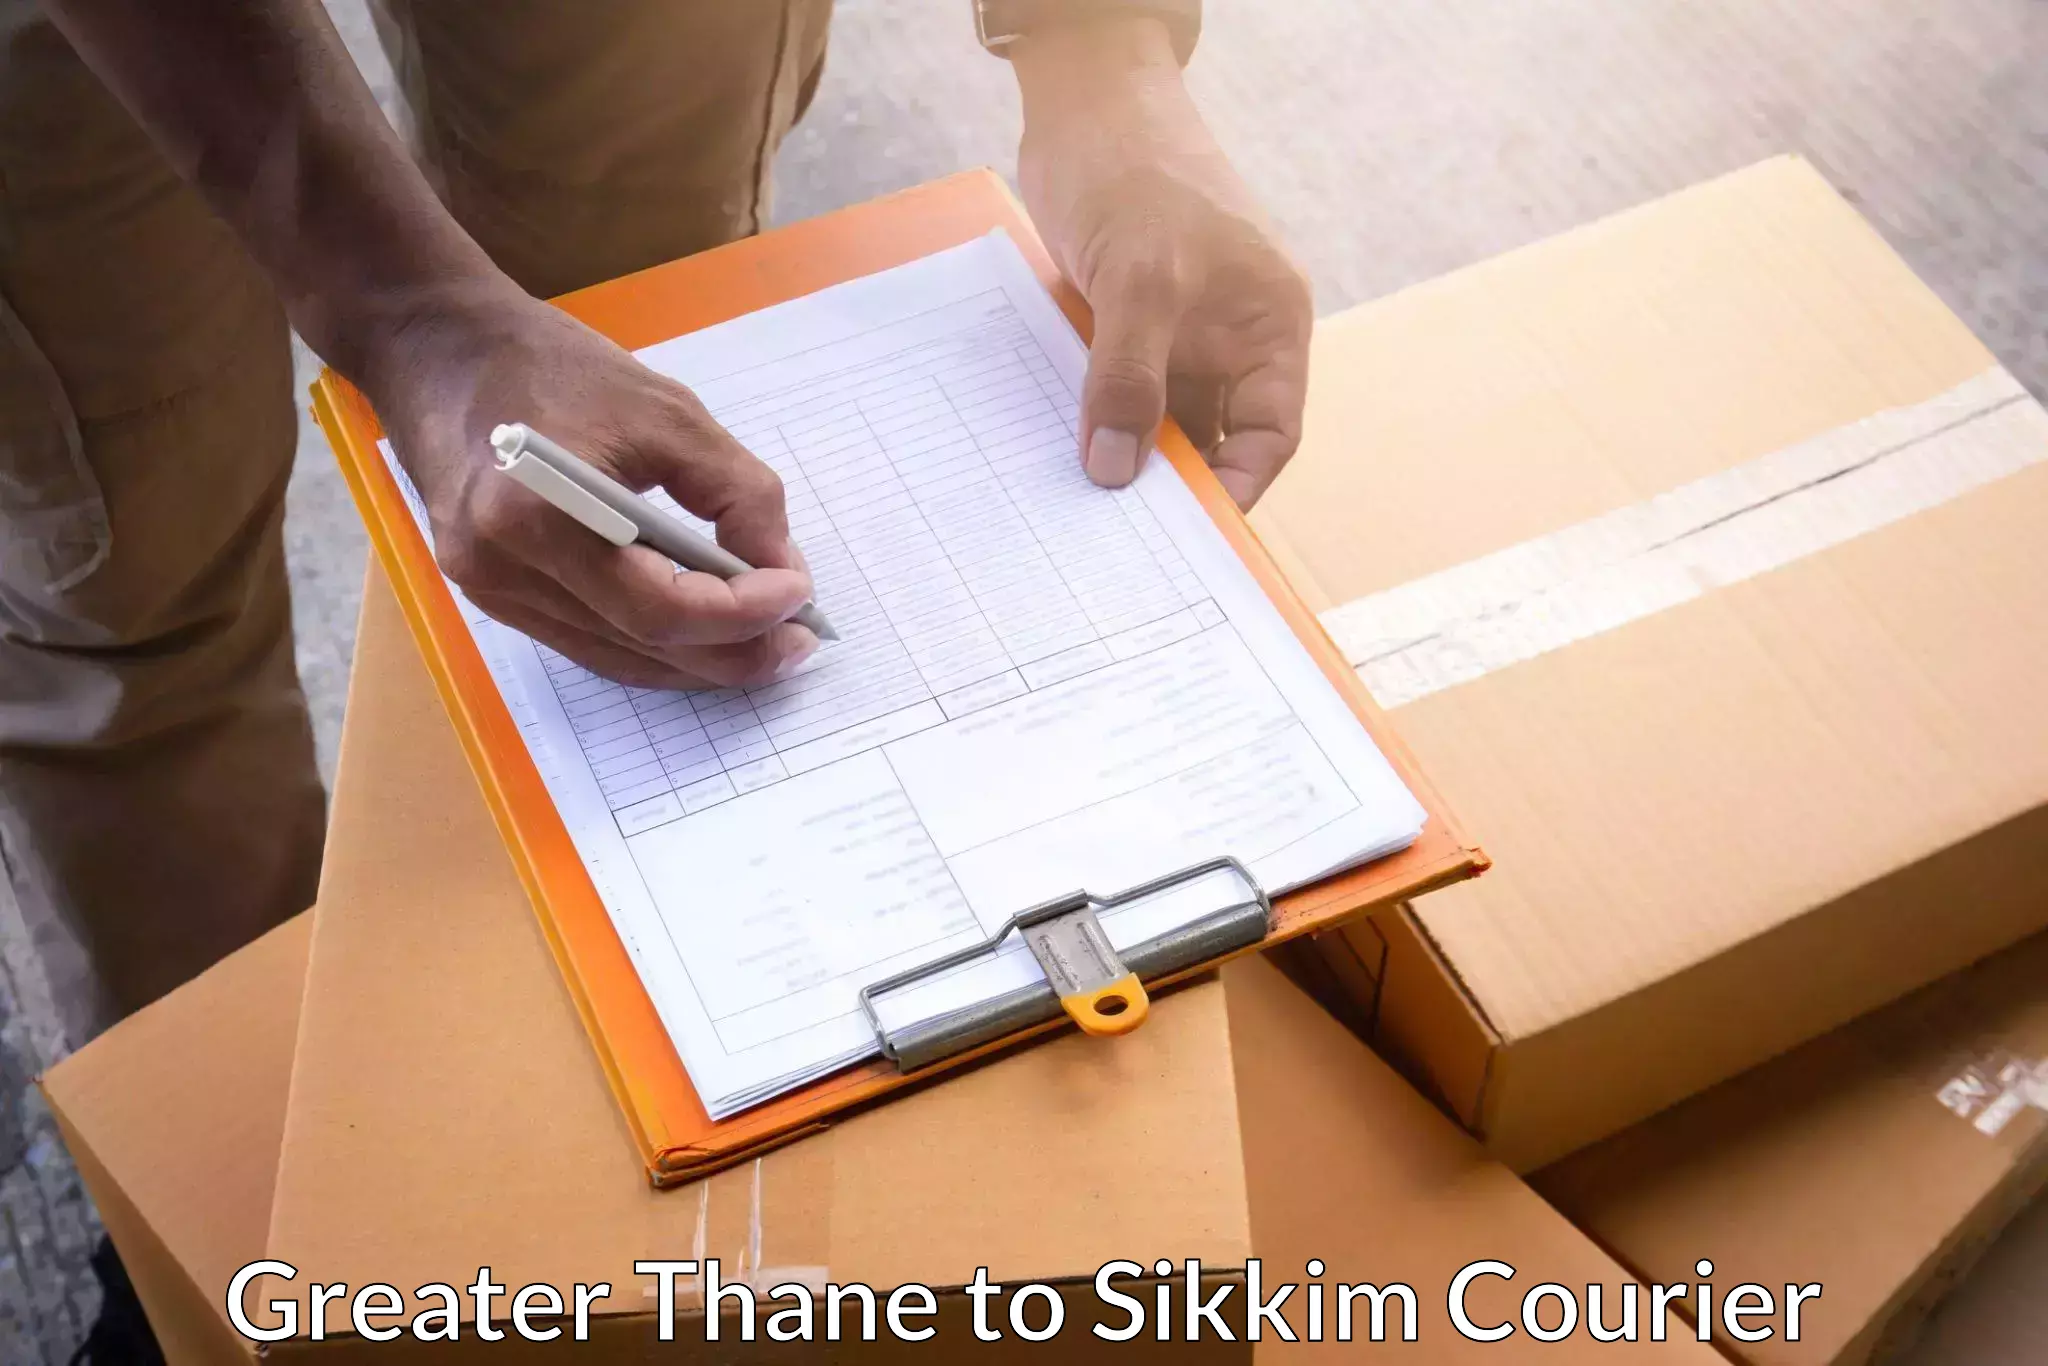 High-speed parcel service Greater Thane to Sikkim